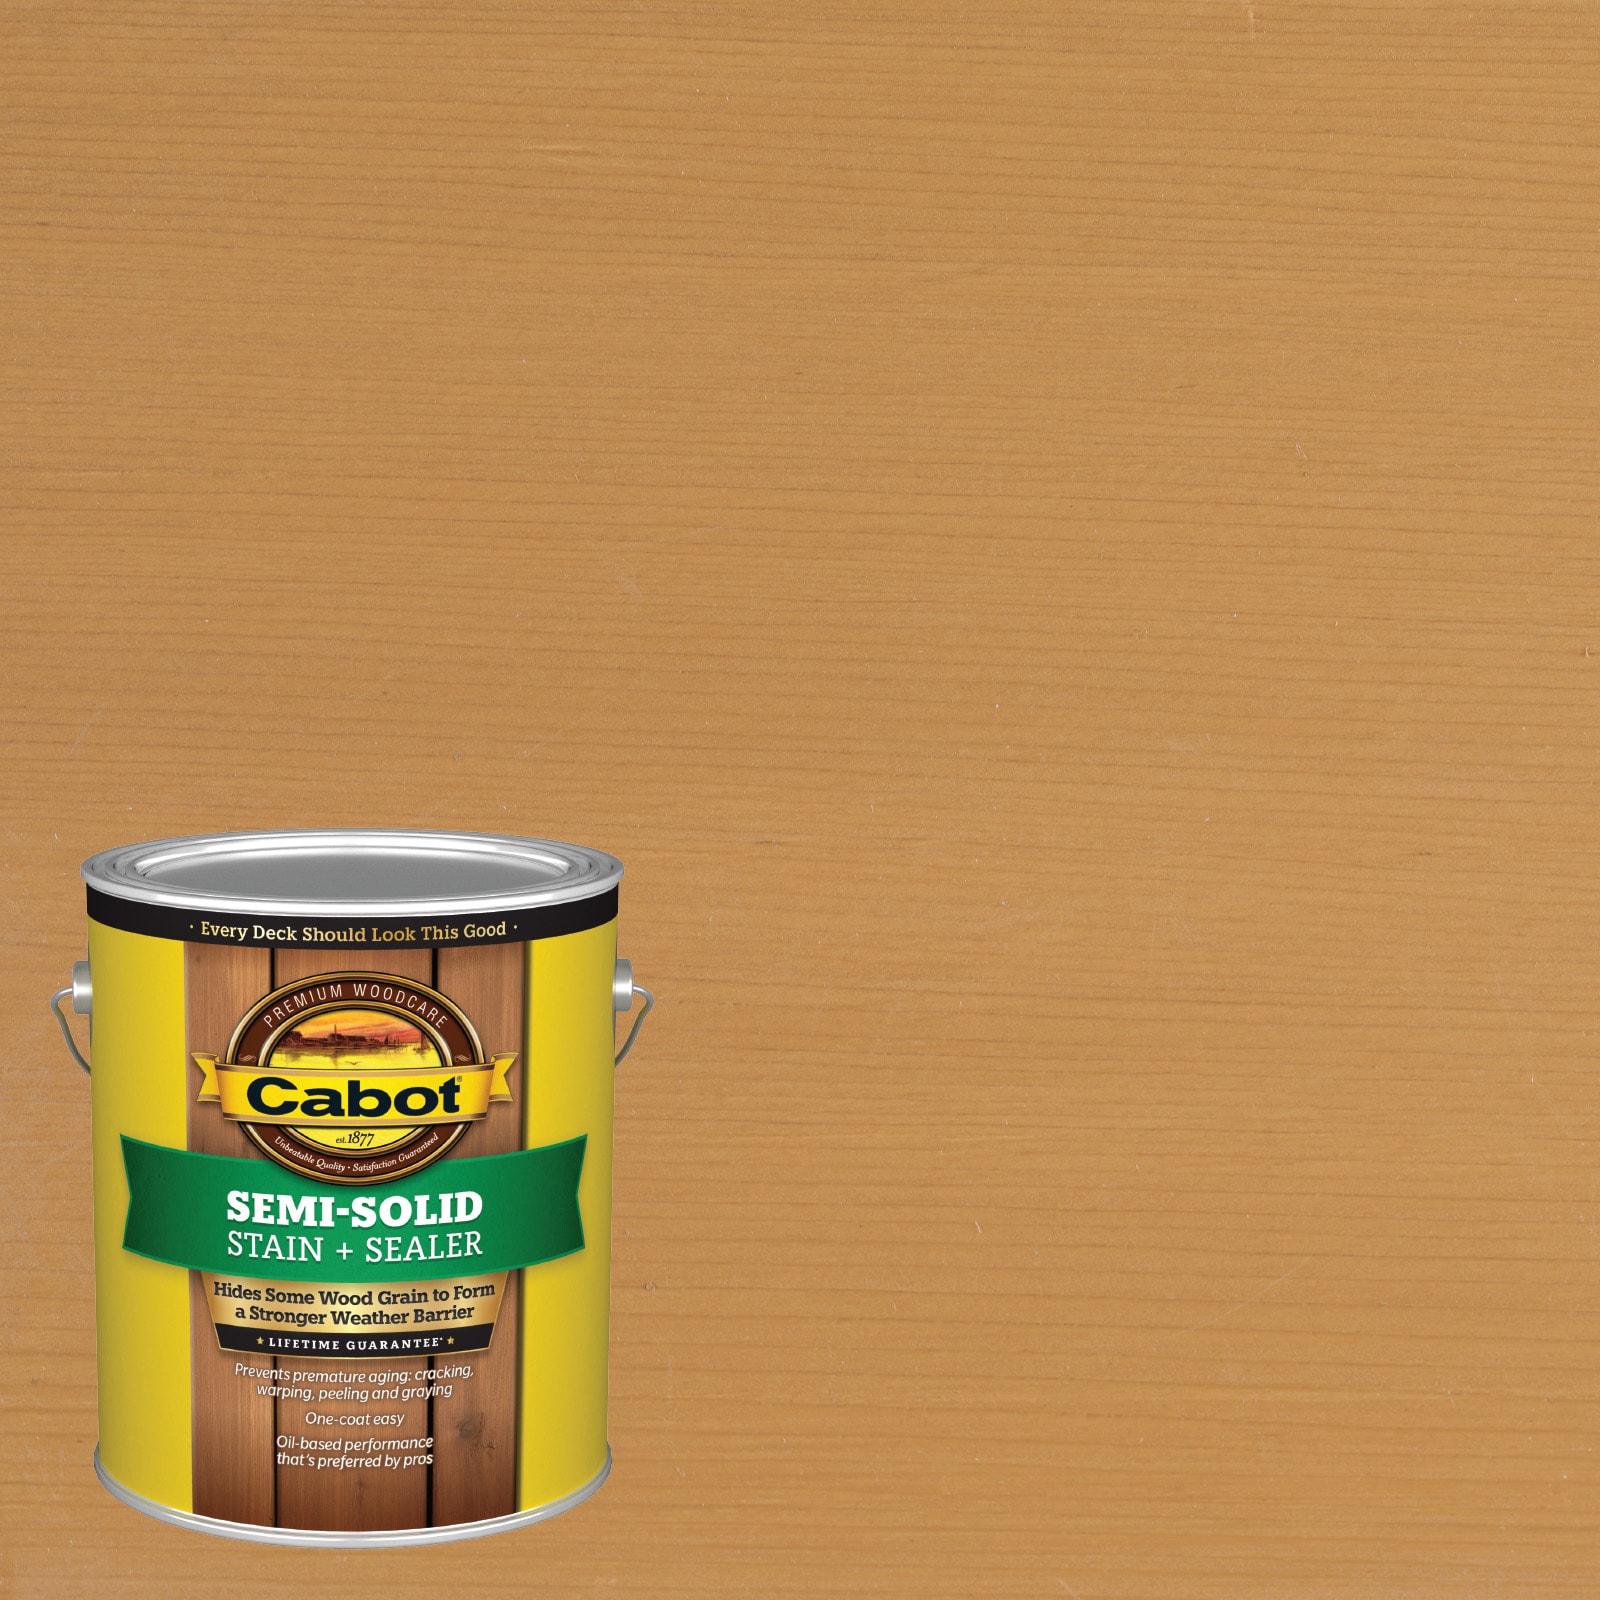 New Cedar Semi-solid Exterior Wood Stain and Sealer (1-Gallon) in Brown | - Cabot NEW CEDAR-379511